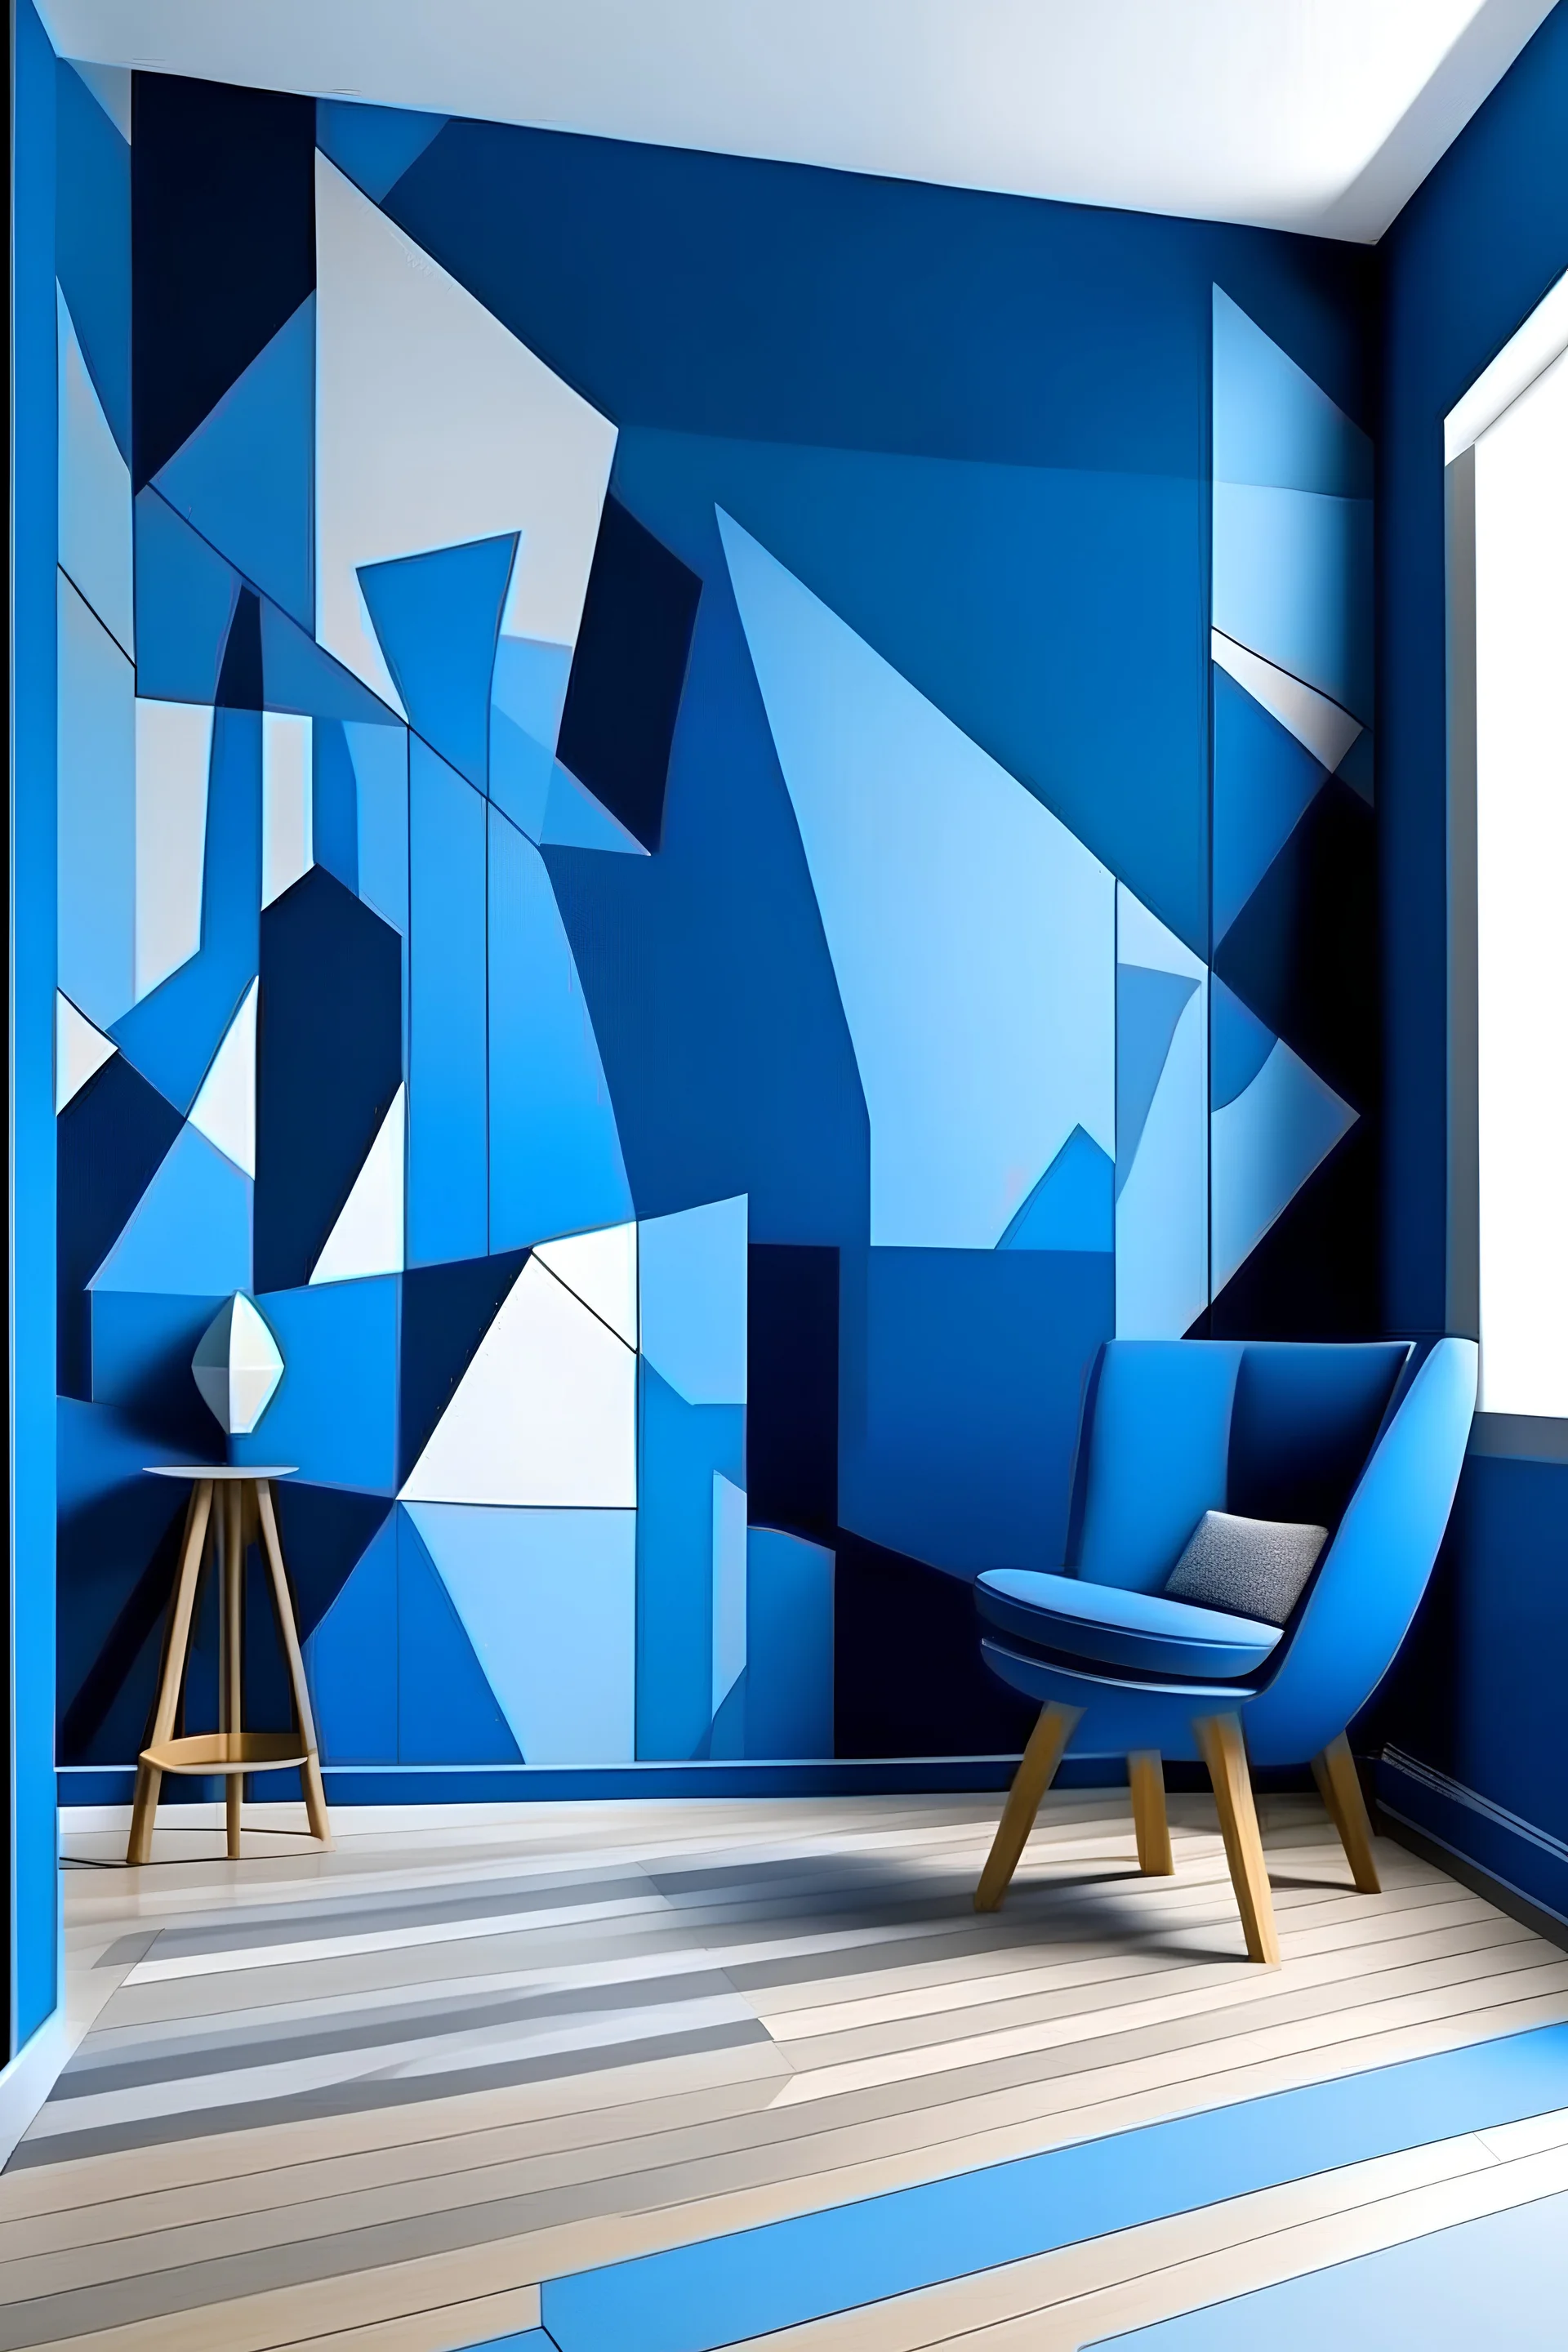 Create handpainted wall mural with angular and intersecting shapes in varying shades of blue, capturing the harmonious spirit of Suprematism. Play with angles and contrasts for a visually engaging result."